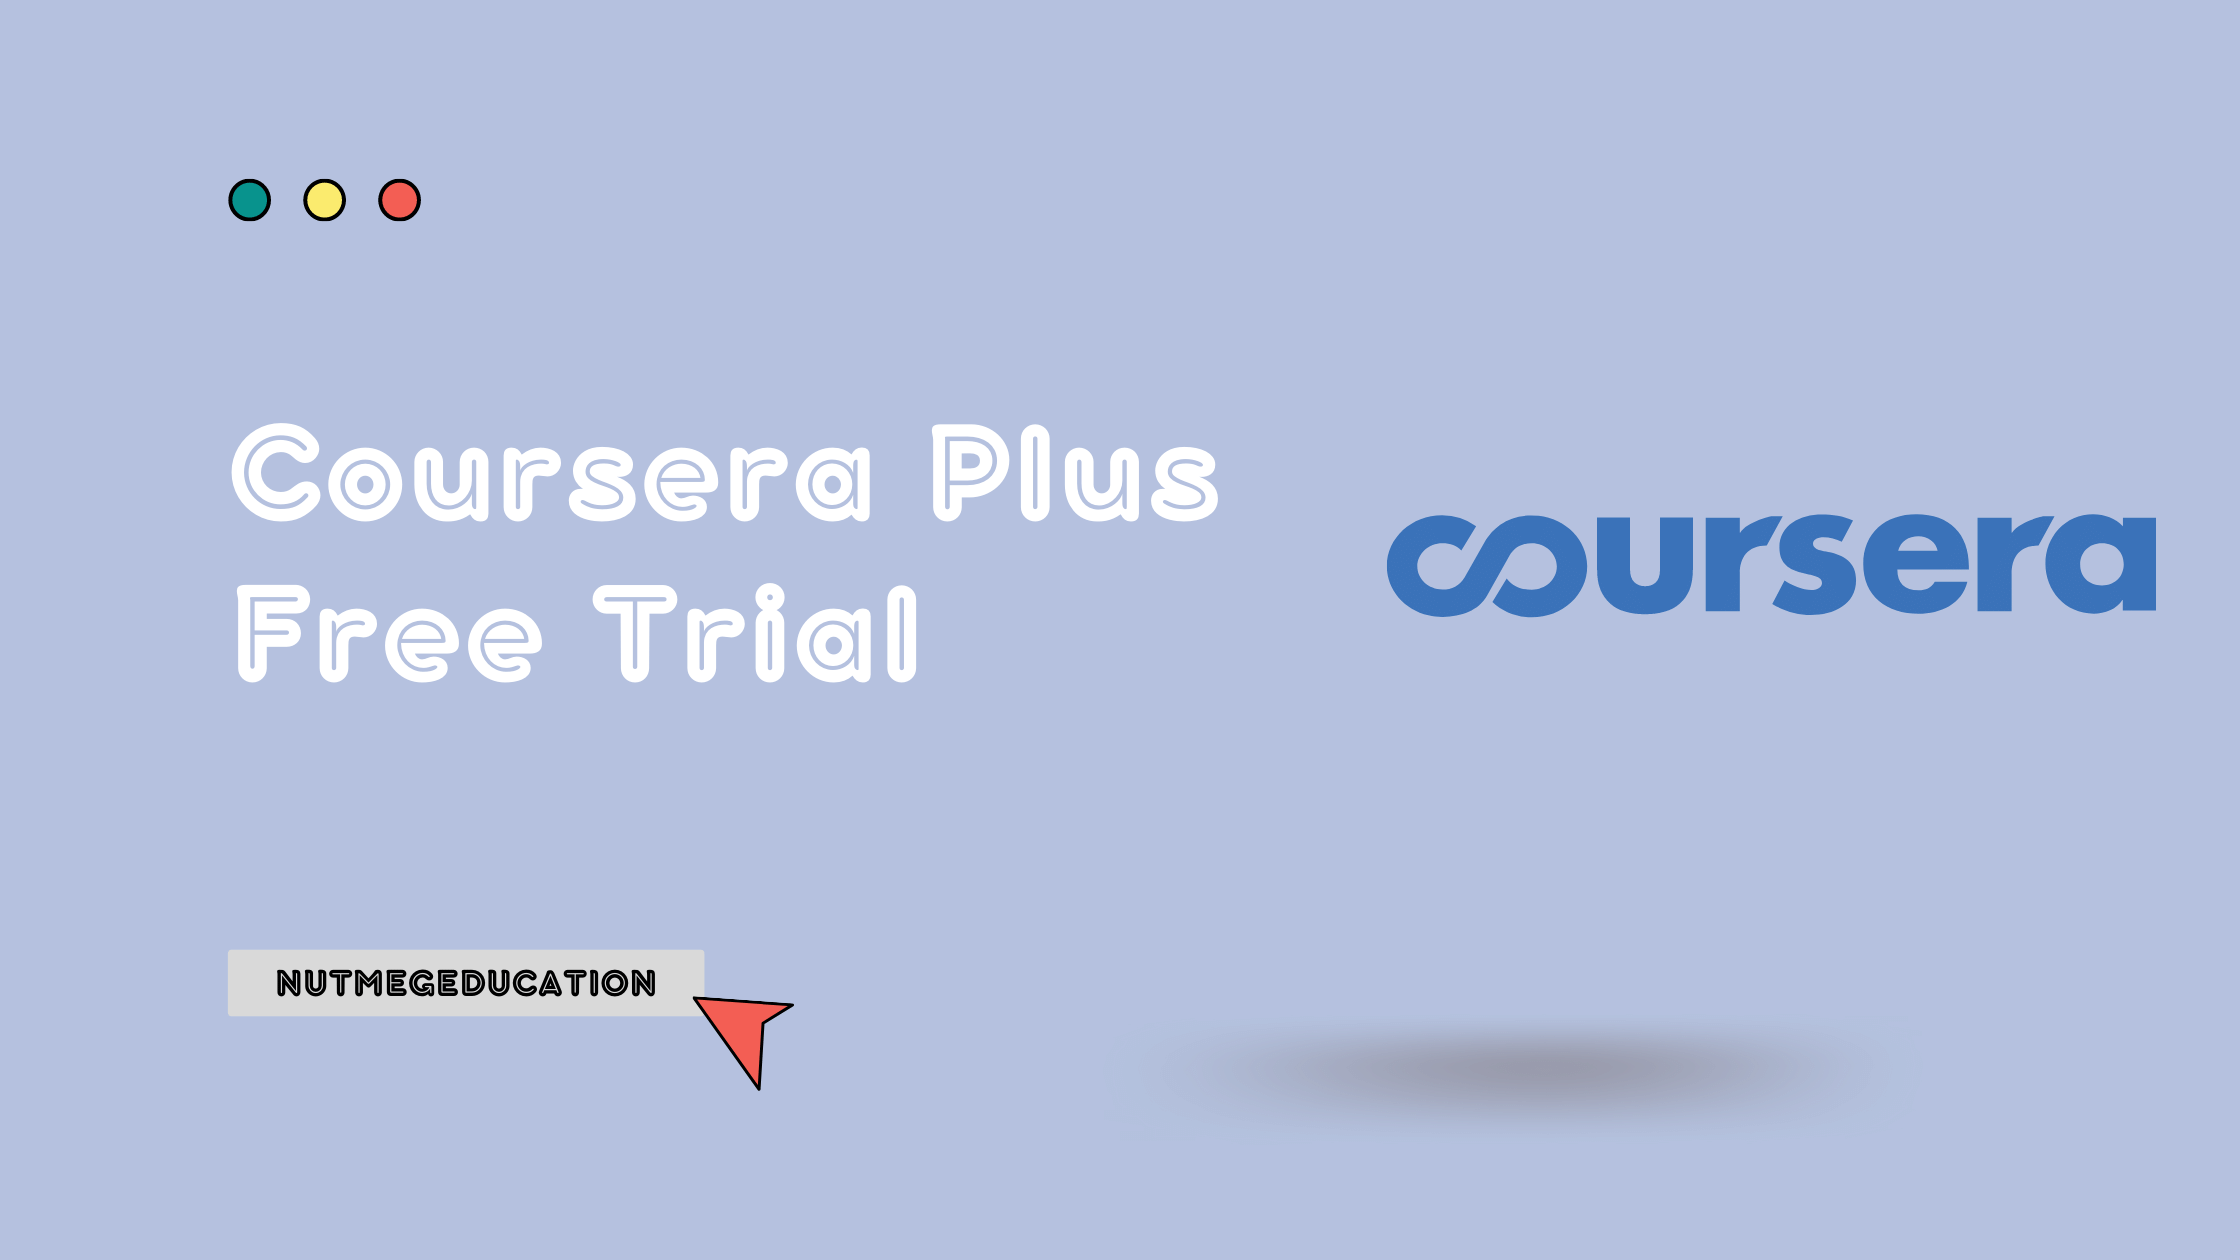 Coursera Plus Free Trial - NutMegEducation